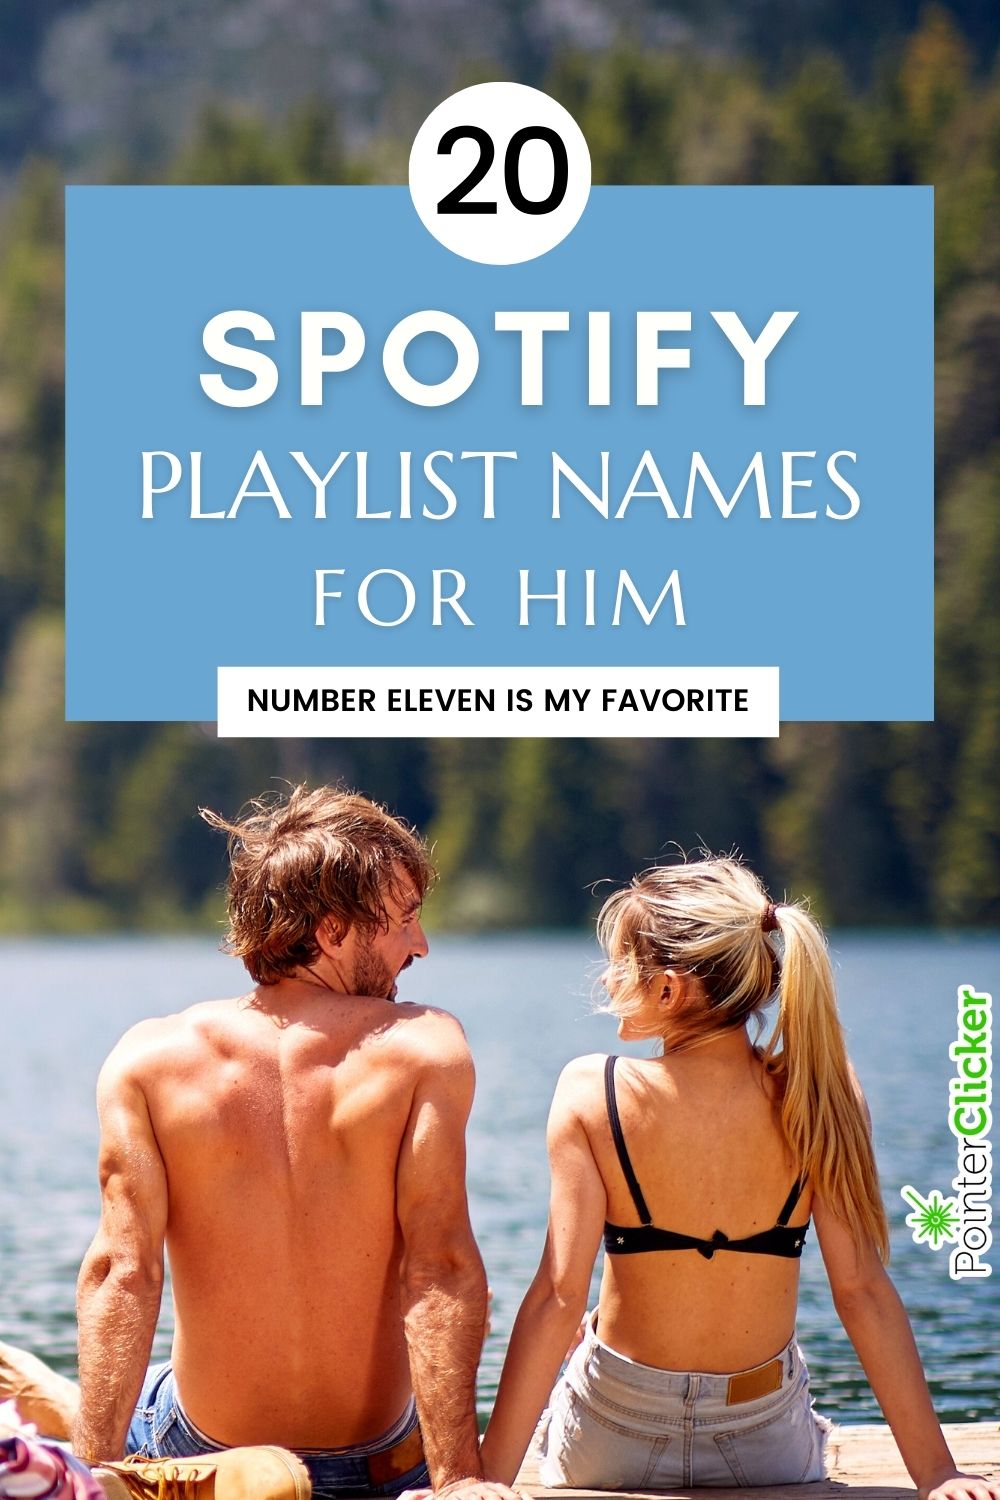 20 spotify playlist names for him